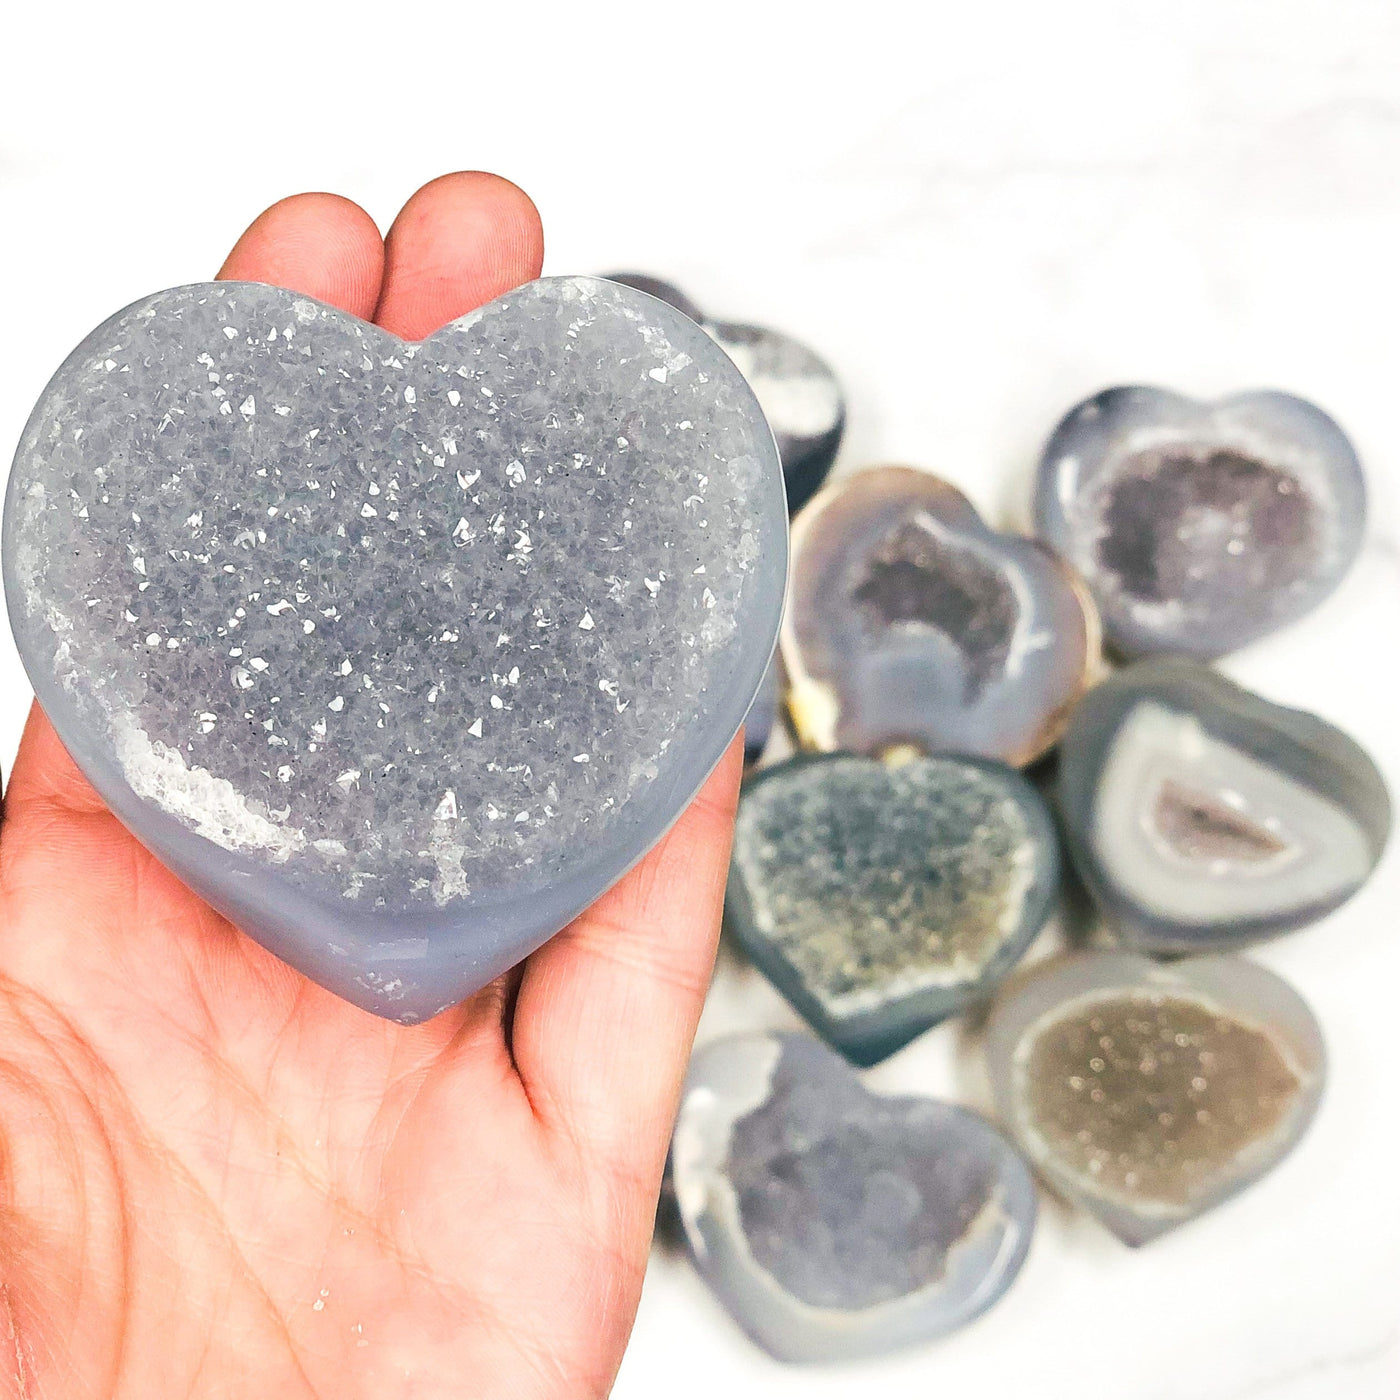 Close up of agate heart with druzy in a hand. Multiple agate hearts in the background on a white surface.